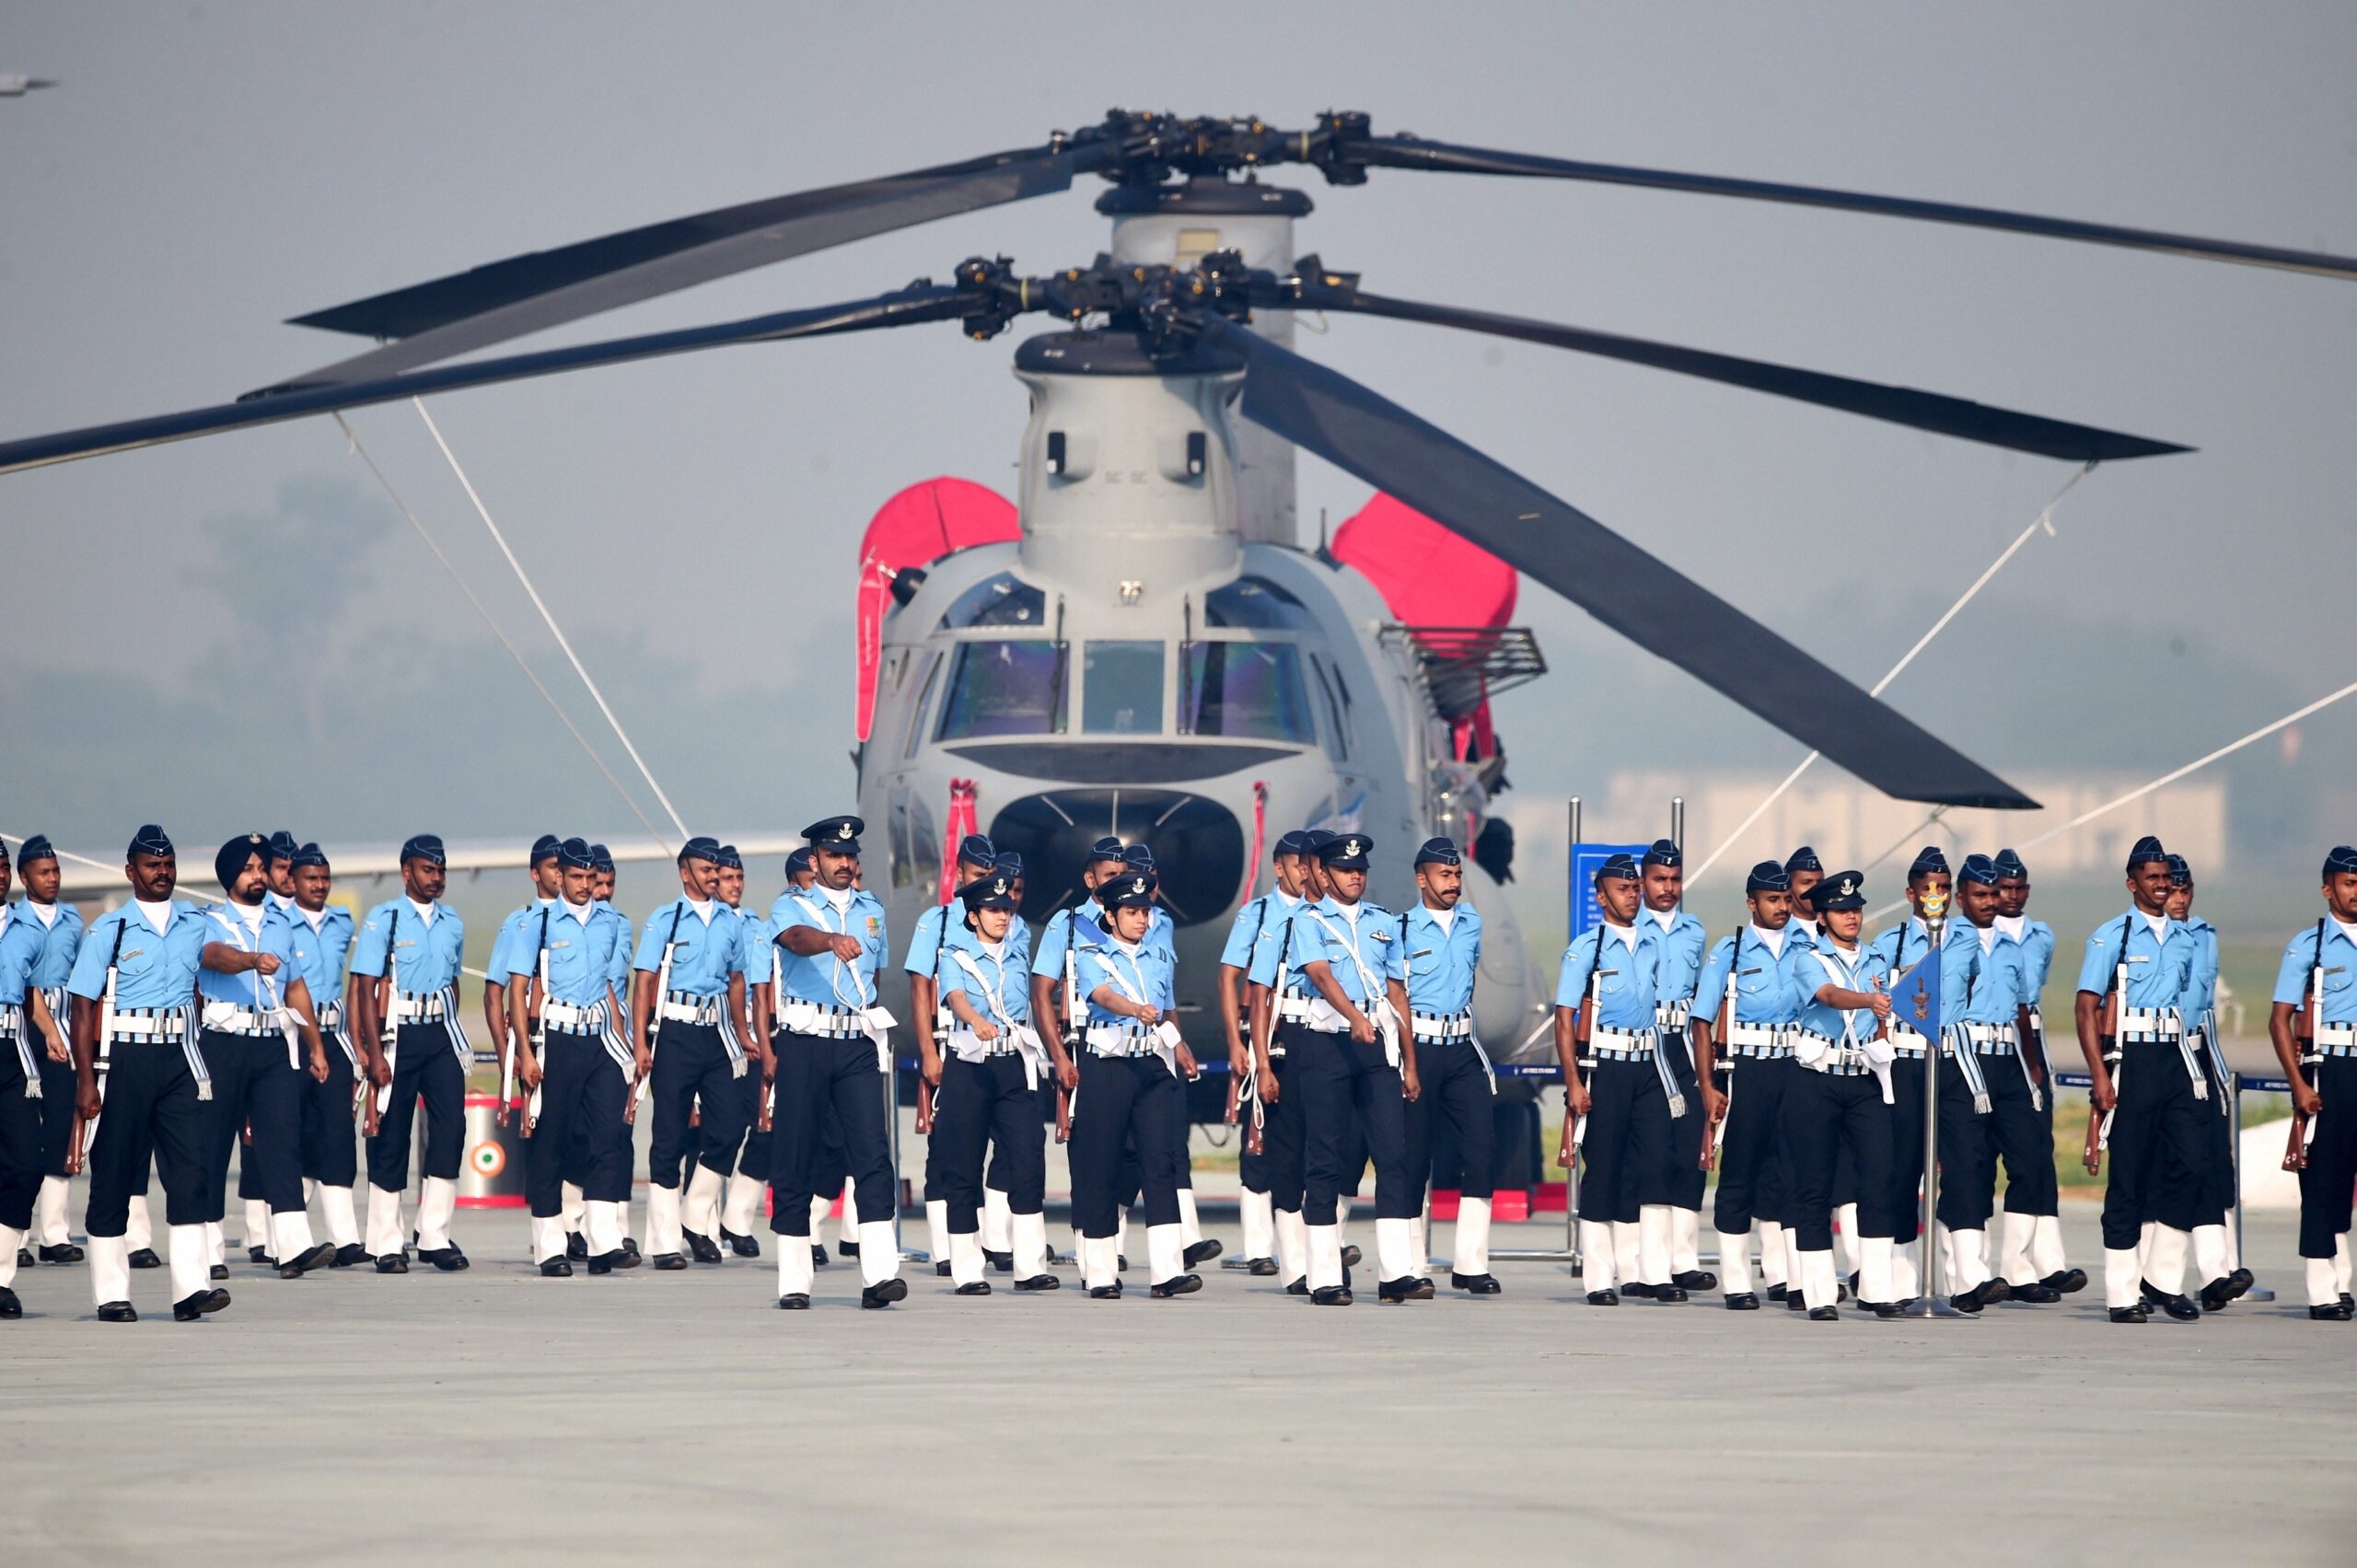 89th Air Force Day full dress rehearsals